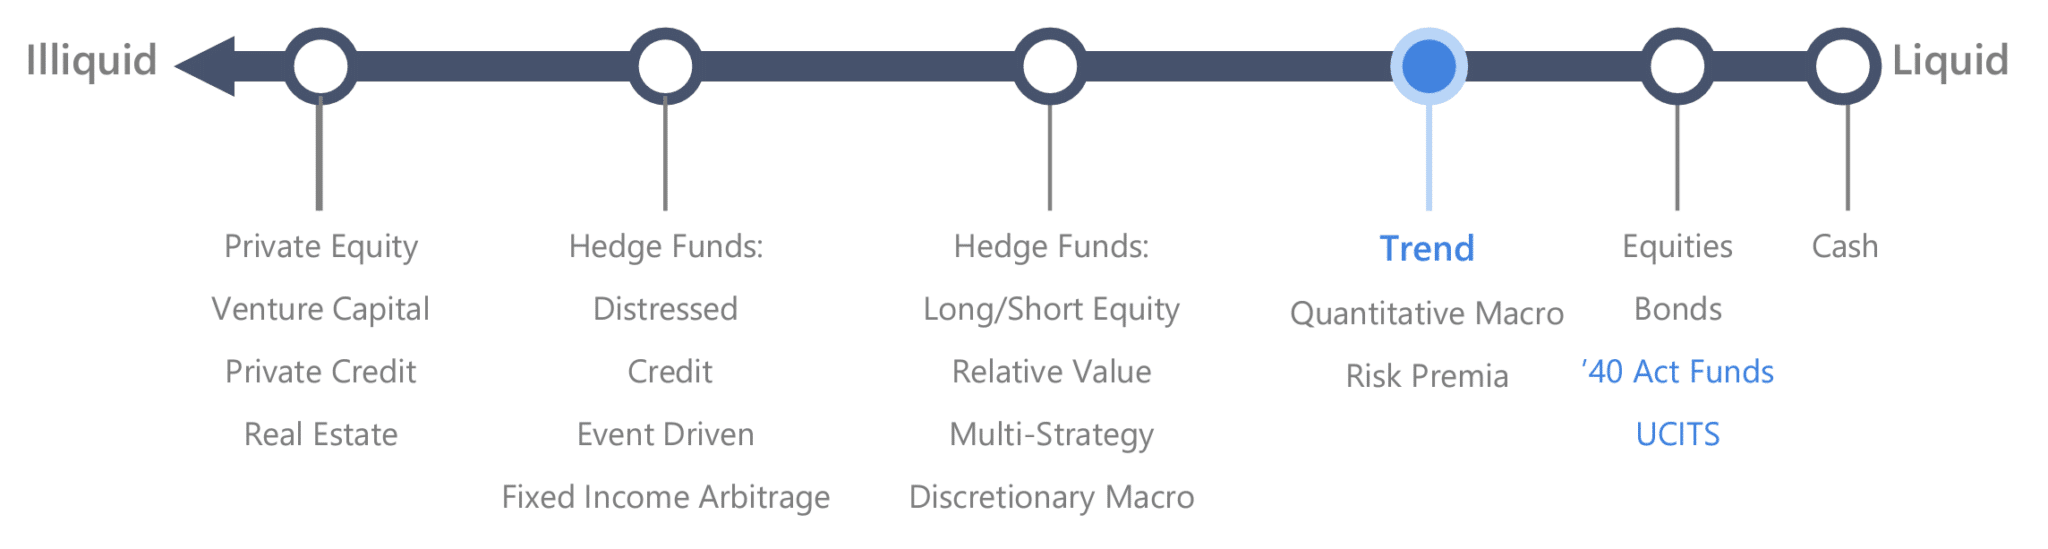 Investor Liquidity of Trend-Following relative to other alternative investment styles